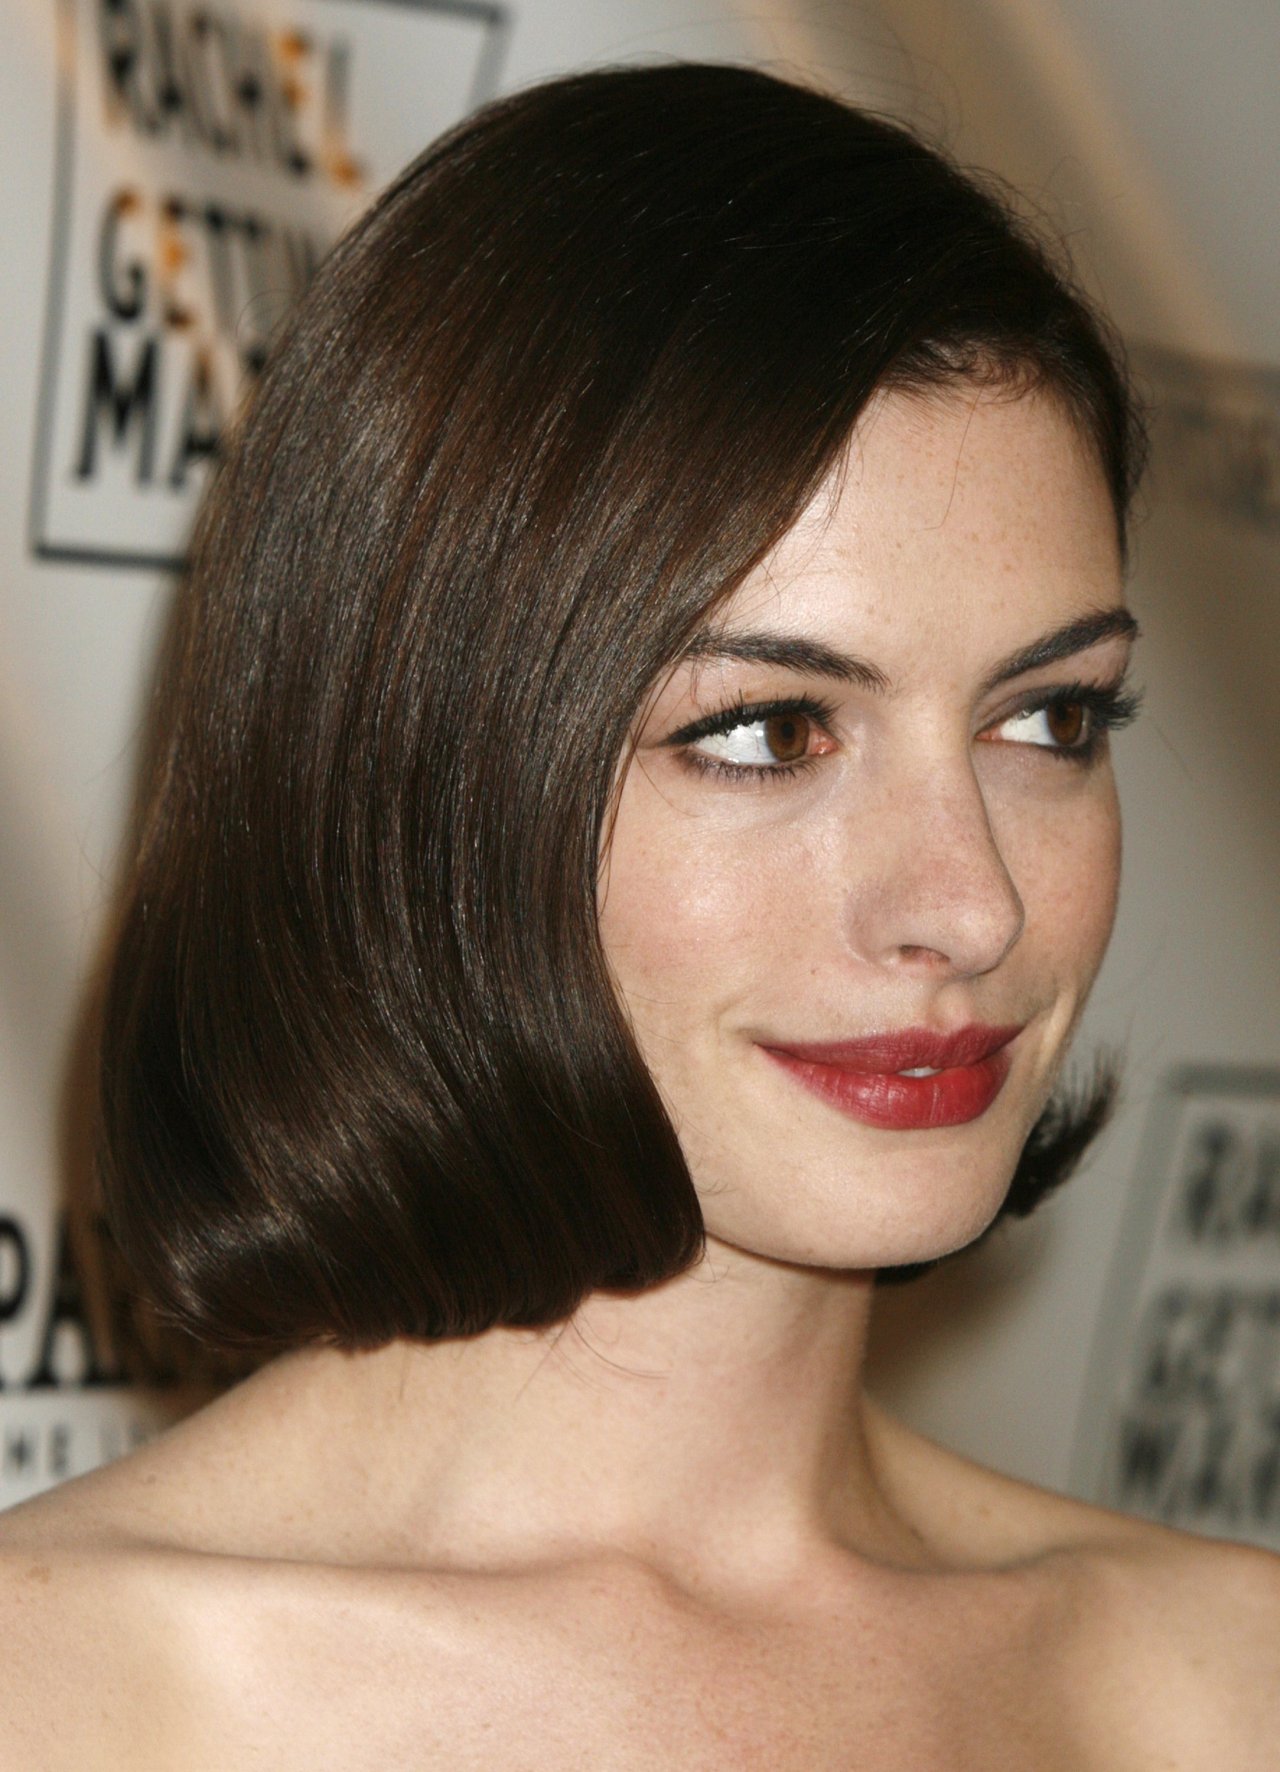 Anne Hathaway wallpapers 35616